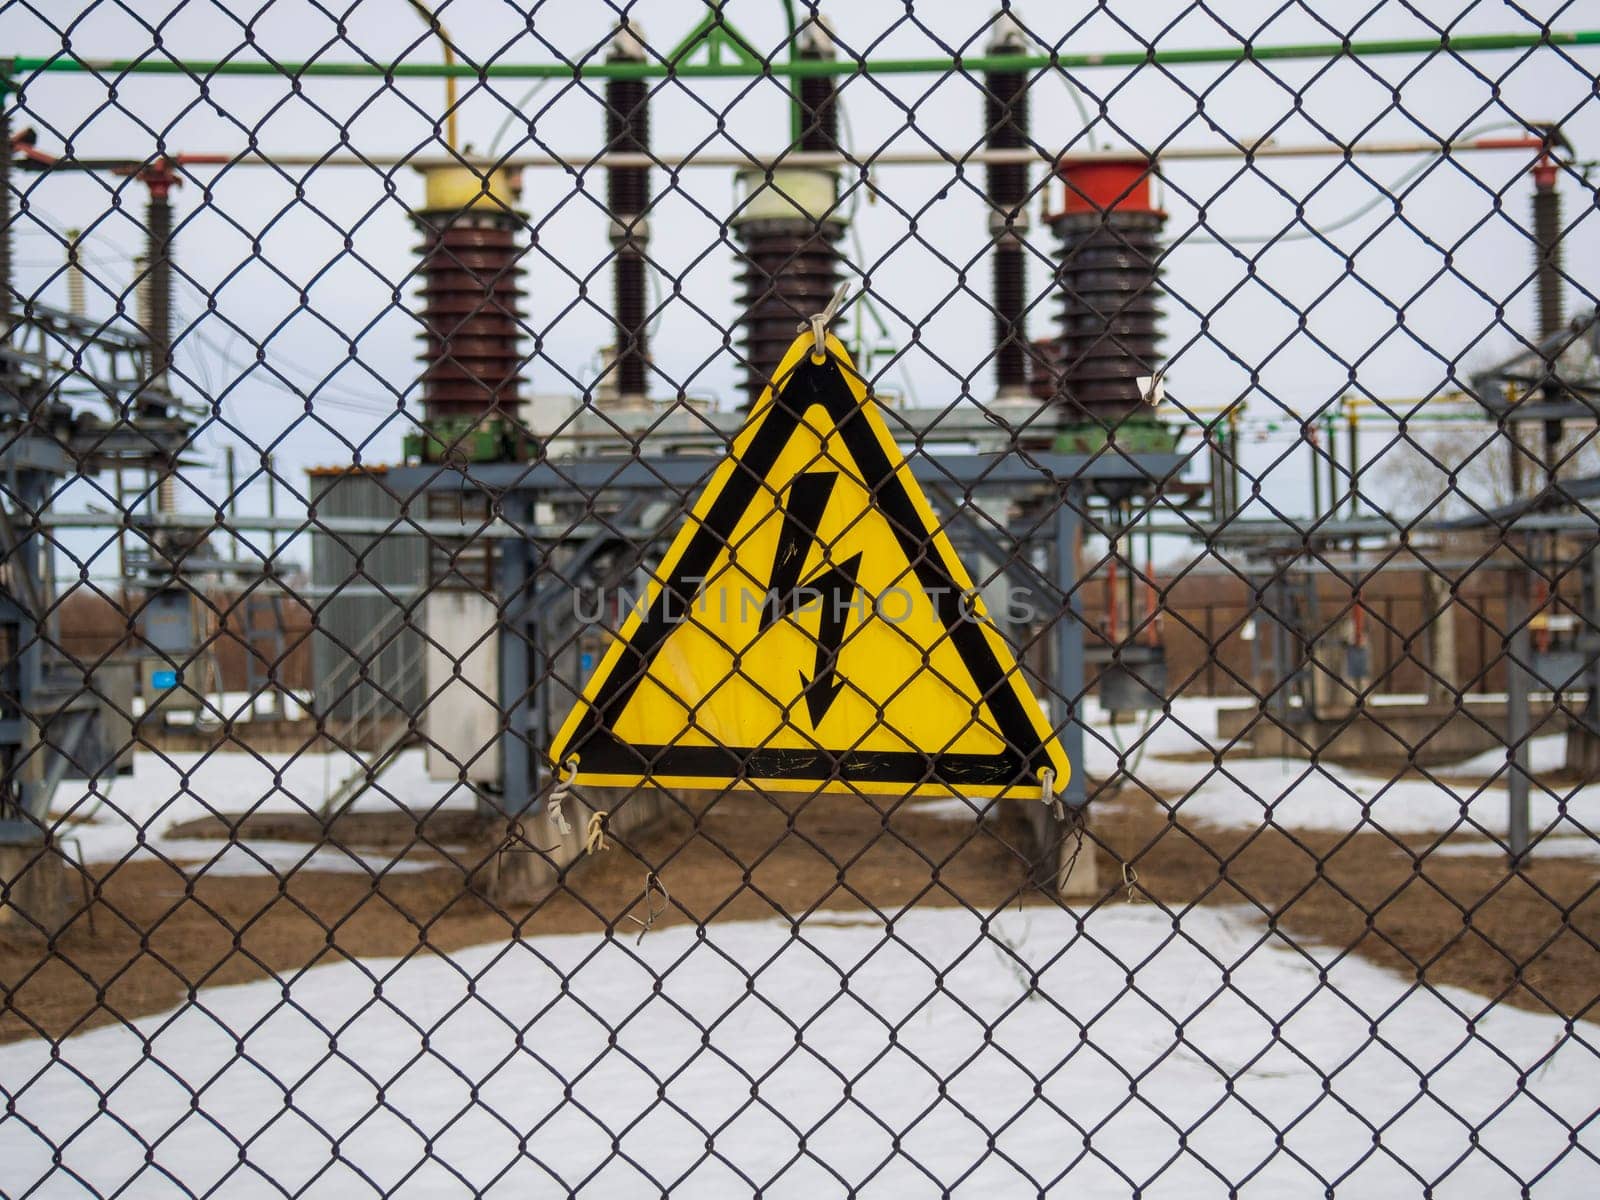 high voltage warning sign on high-voltage substation by Andre1ns